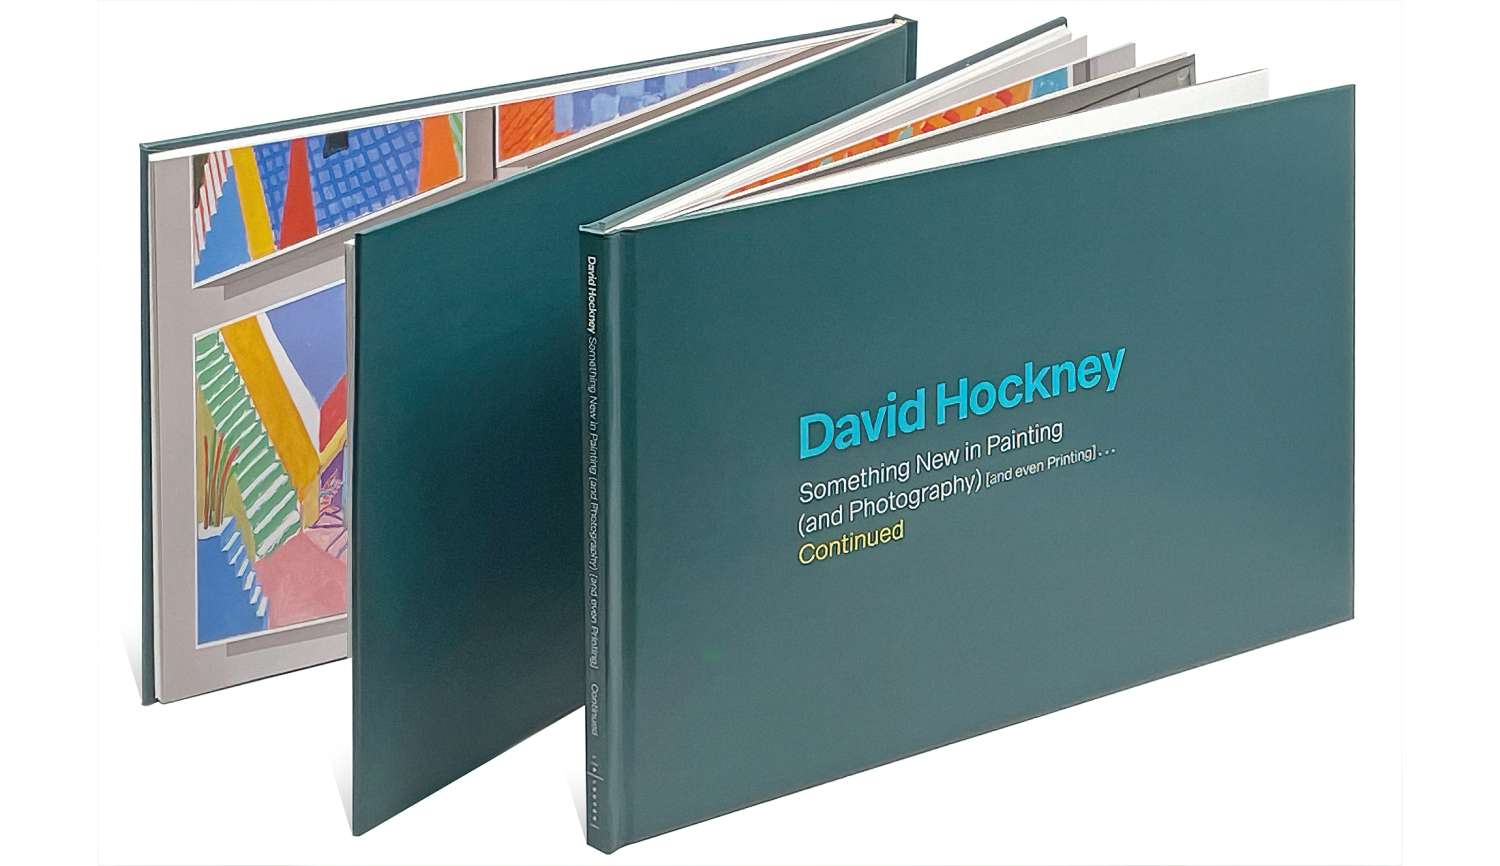 David Hockney: Something New In Painting (and Photography) [and even Printing] …